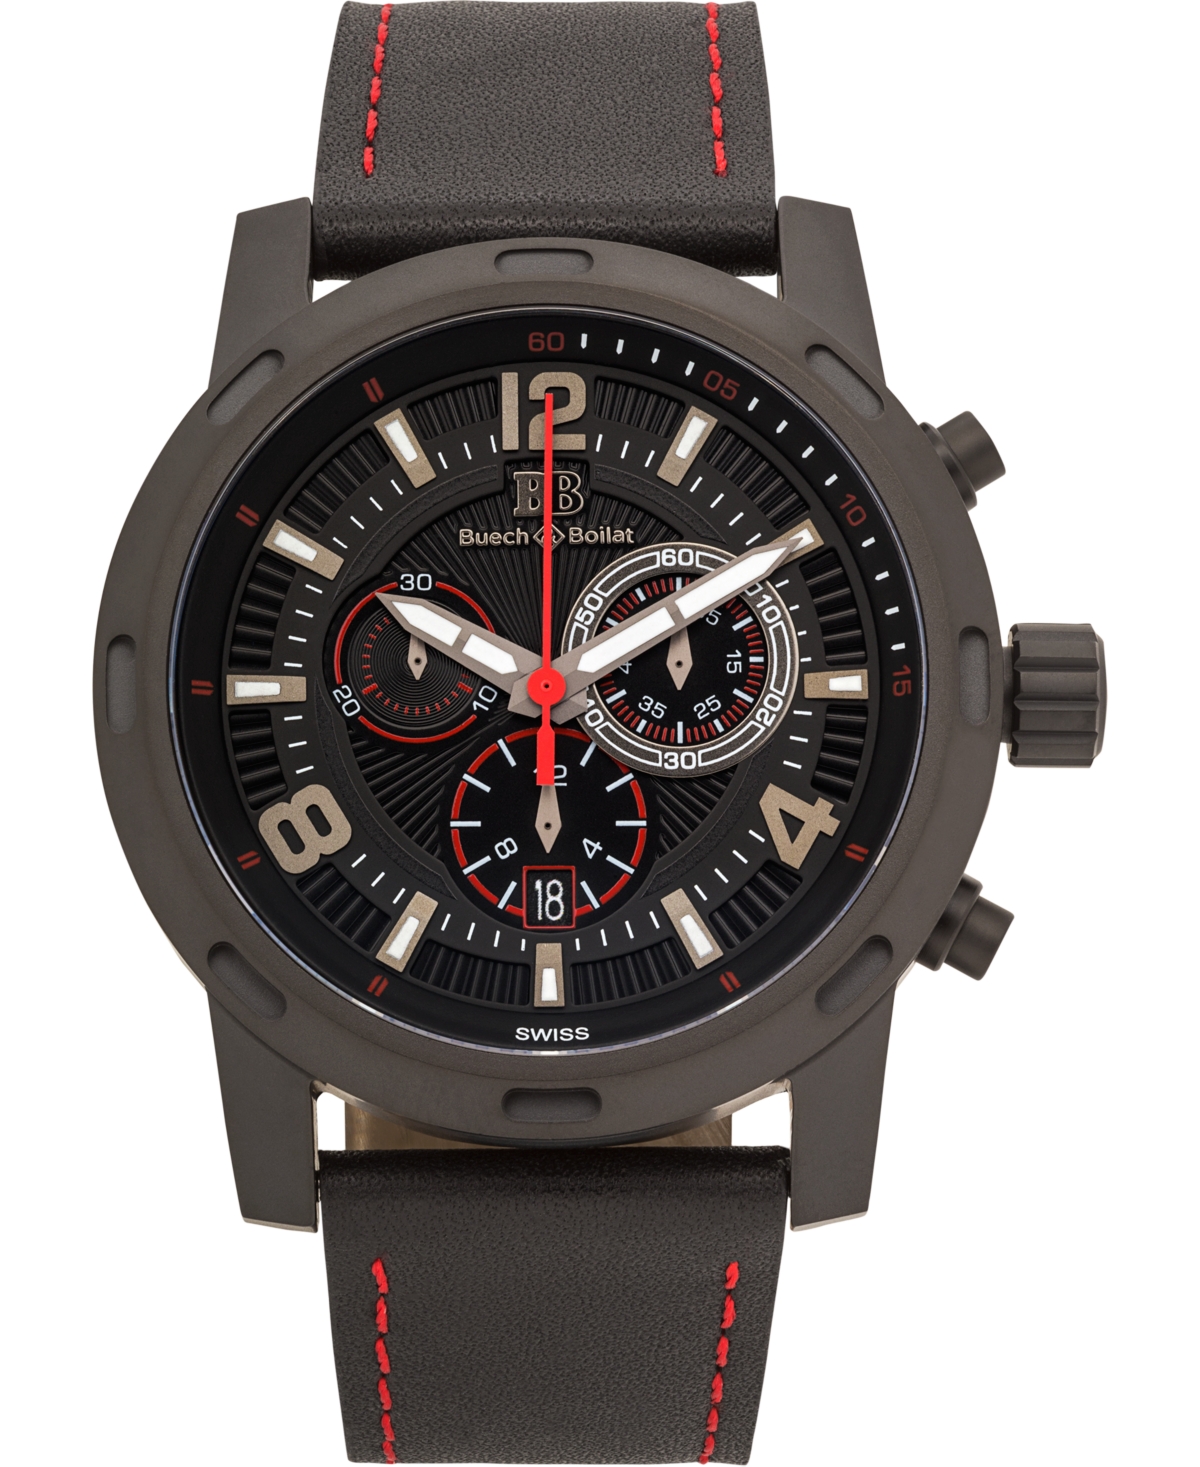 Baracchi Mens Chronograph Watch - Black Leather Strap, Black and Red Dial, 46mm - Black